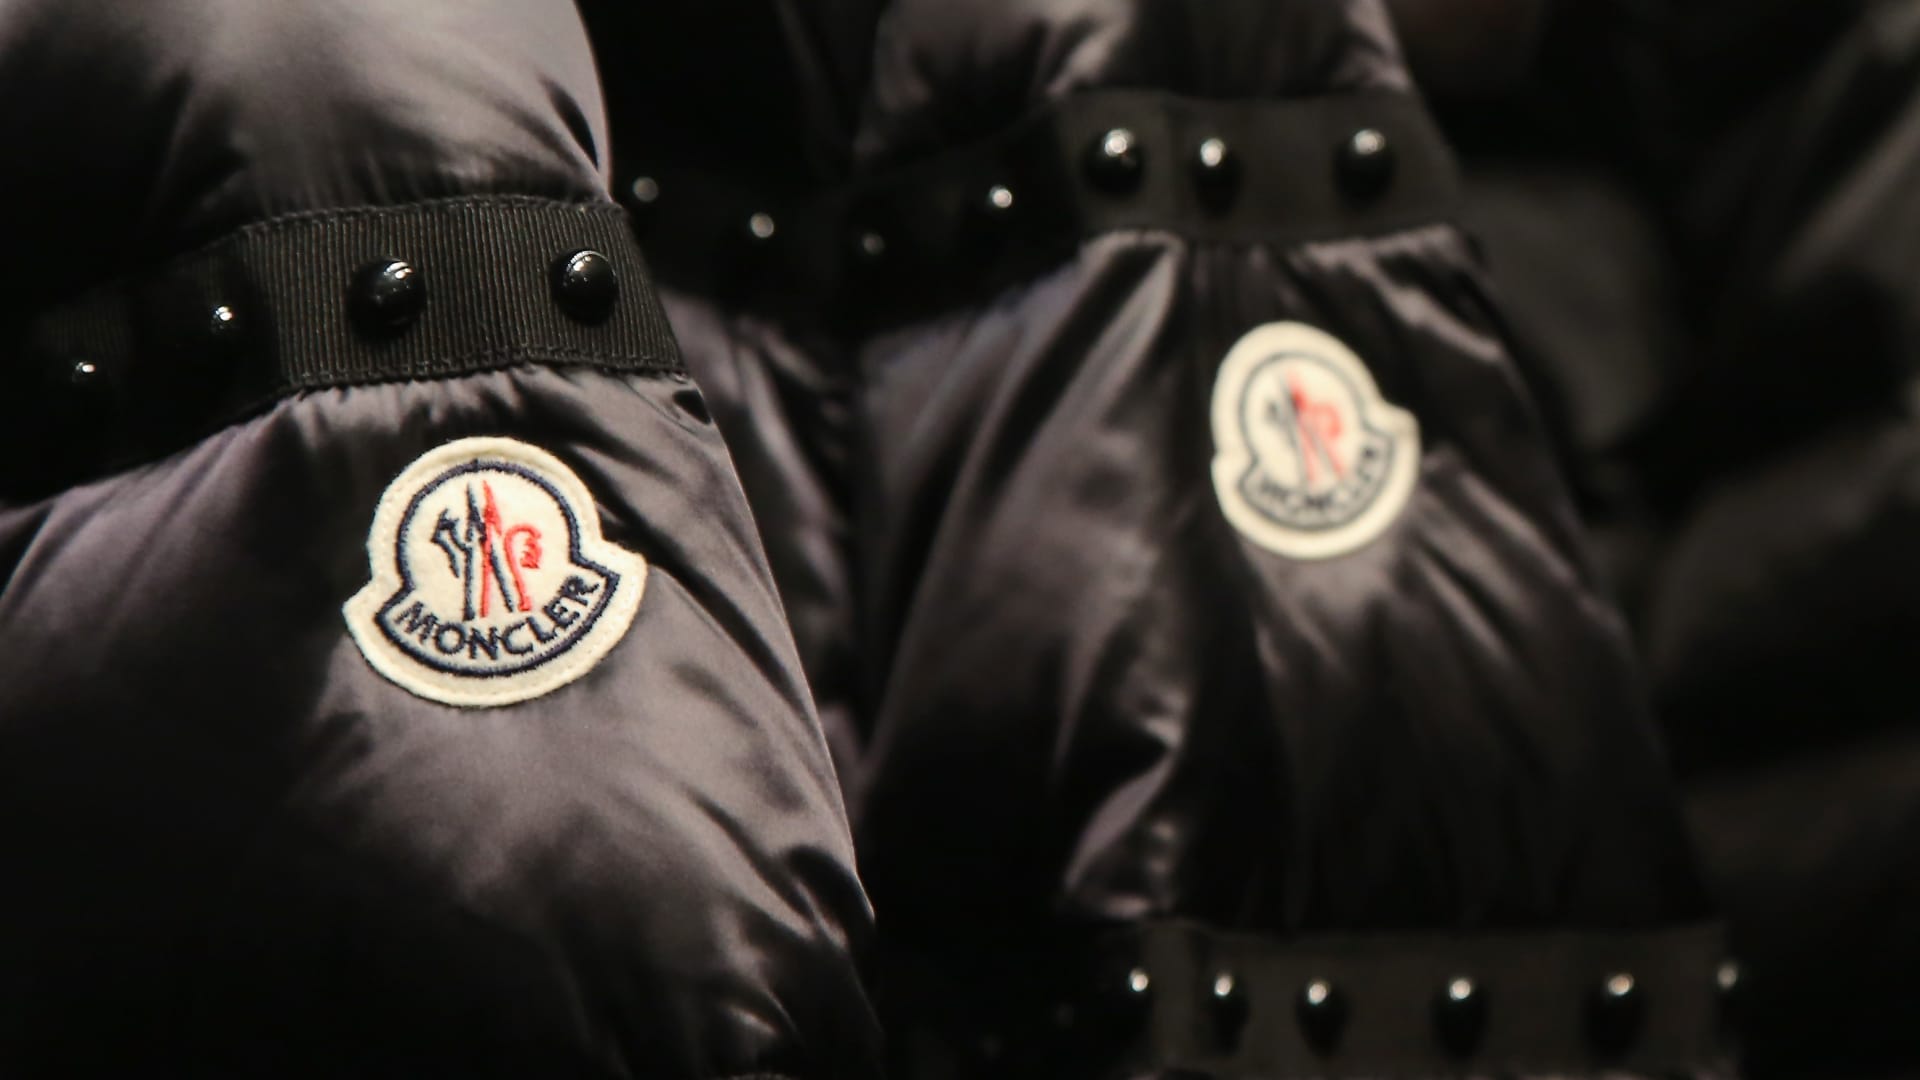 Fashion mogul Moncler heads for IPO